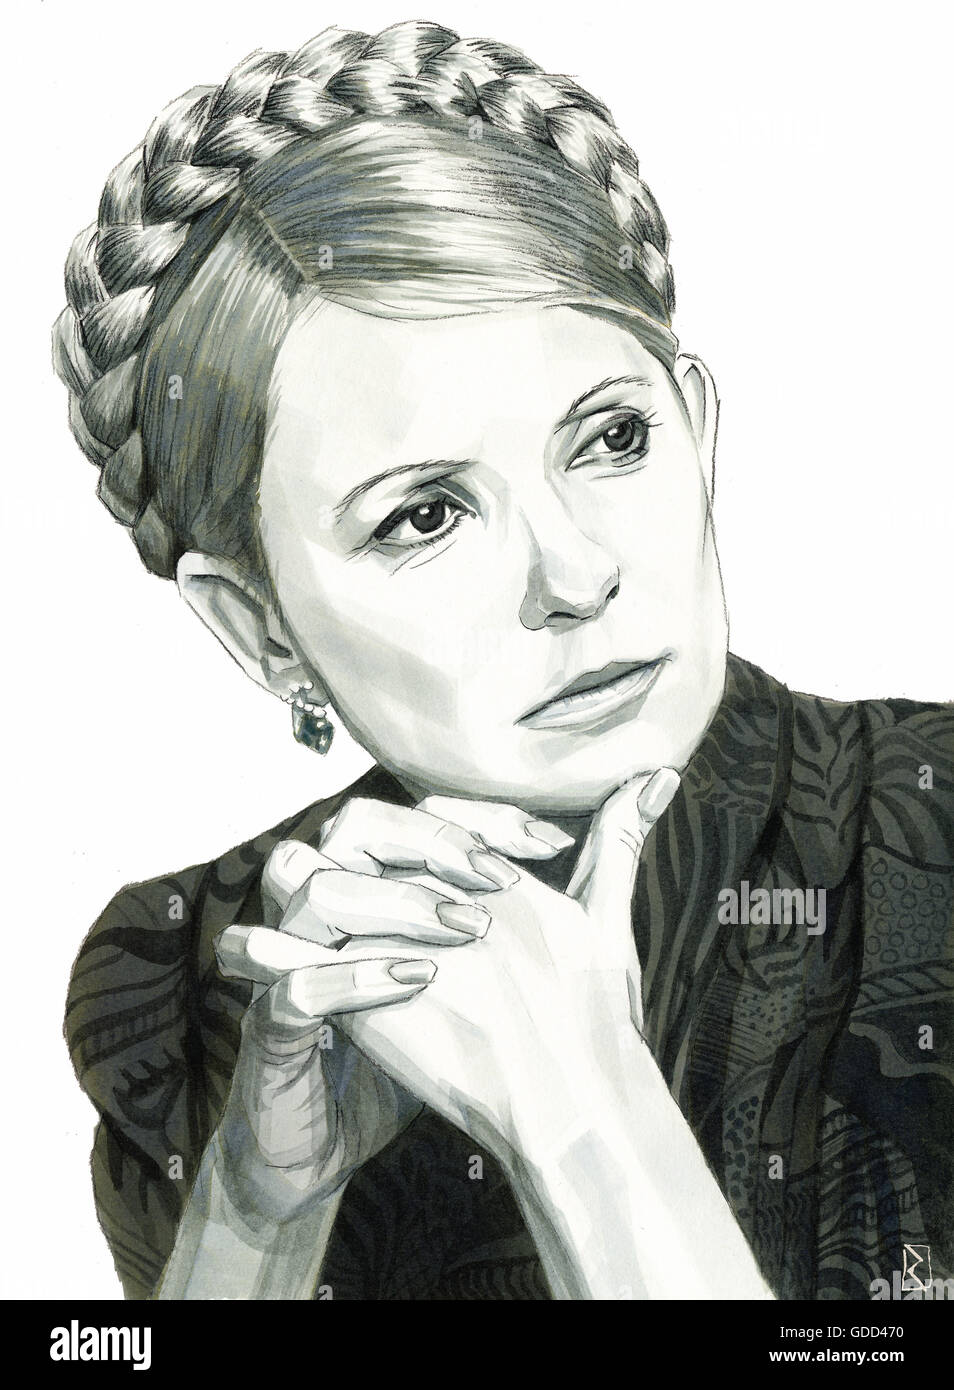 Tymoshenko, Yulia, * 27.11.1960, Ukrainian politician, Prime Minister of the Ukraine 2007-2010, portrait, monochrome drawing by Jan Rieckhoff, 20.1.2011, Artist's Copyright already cleared through INTERFOTO, no additional clearance necessary Stock Photo